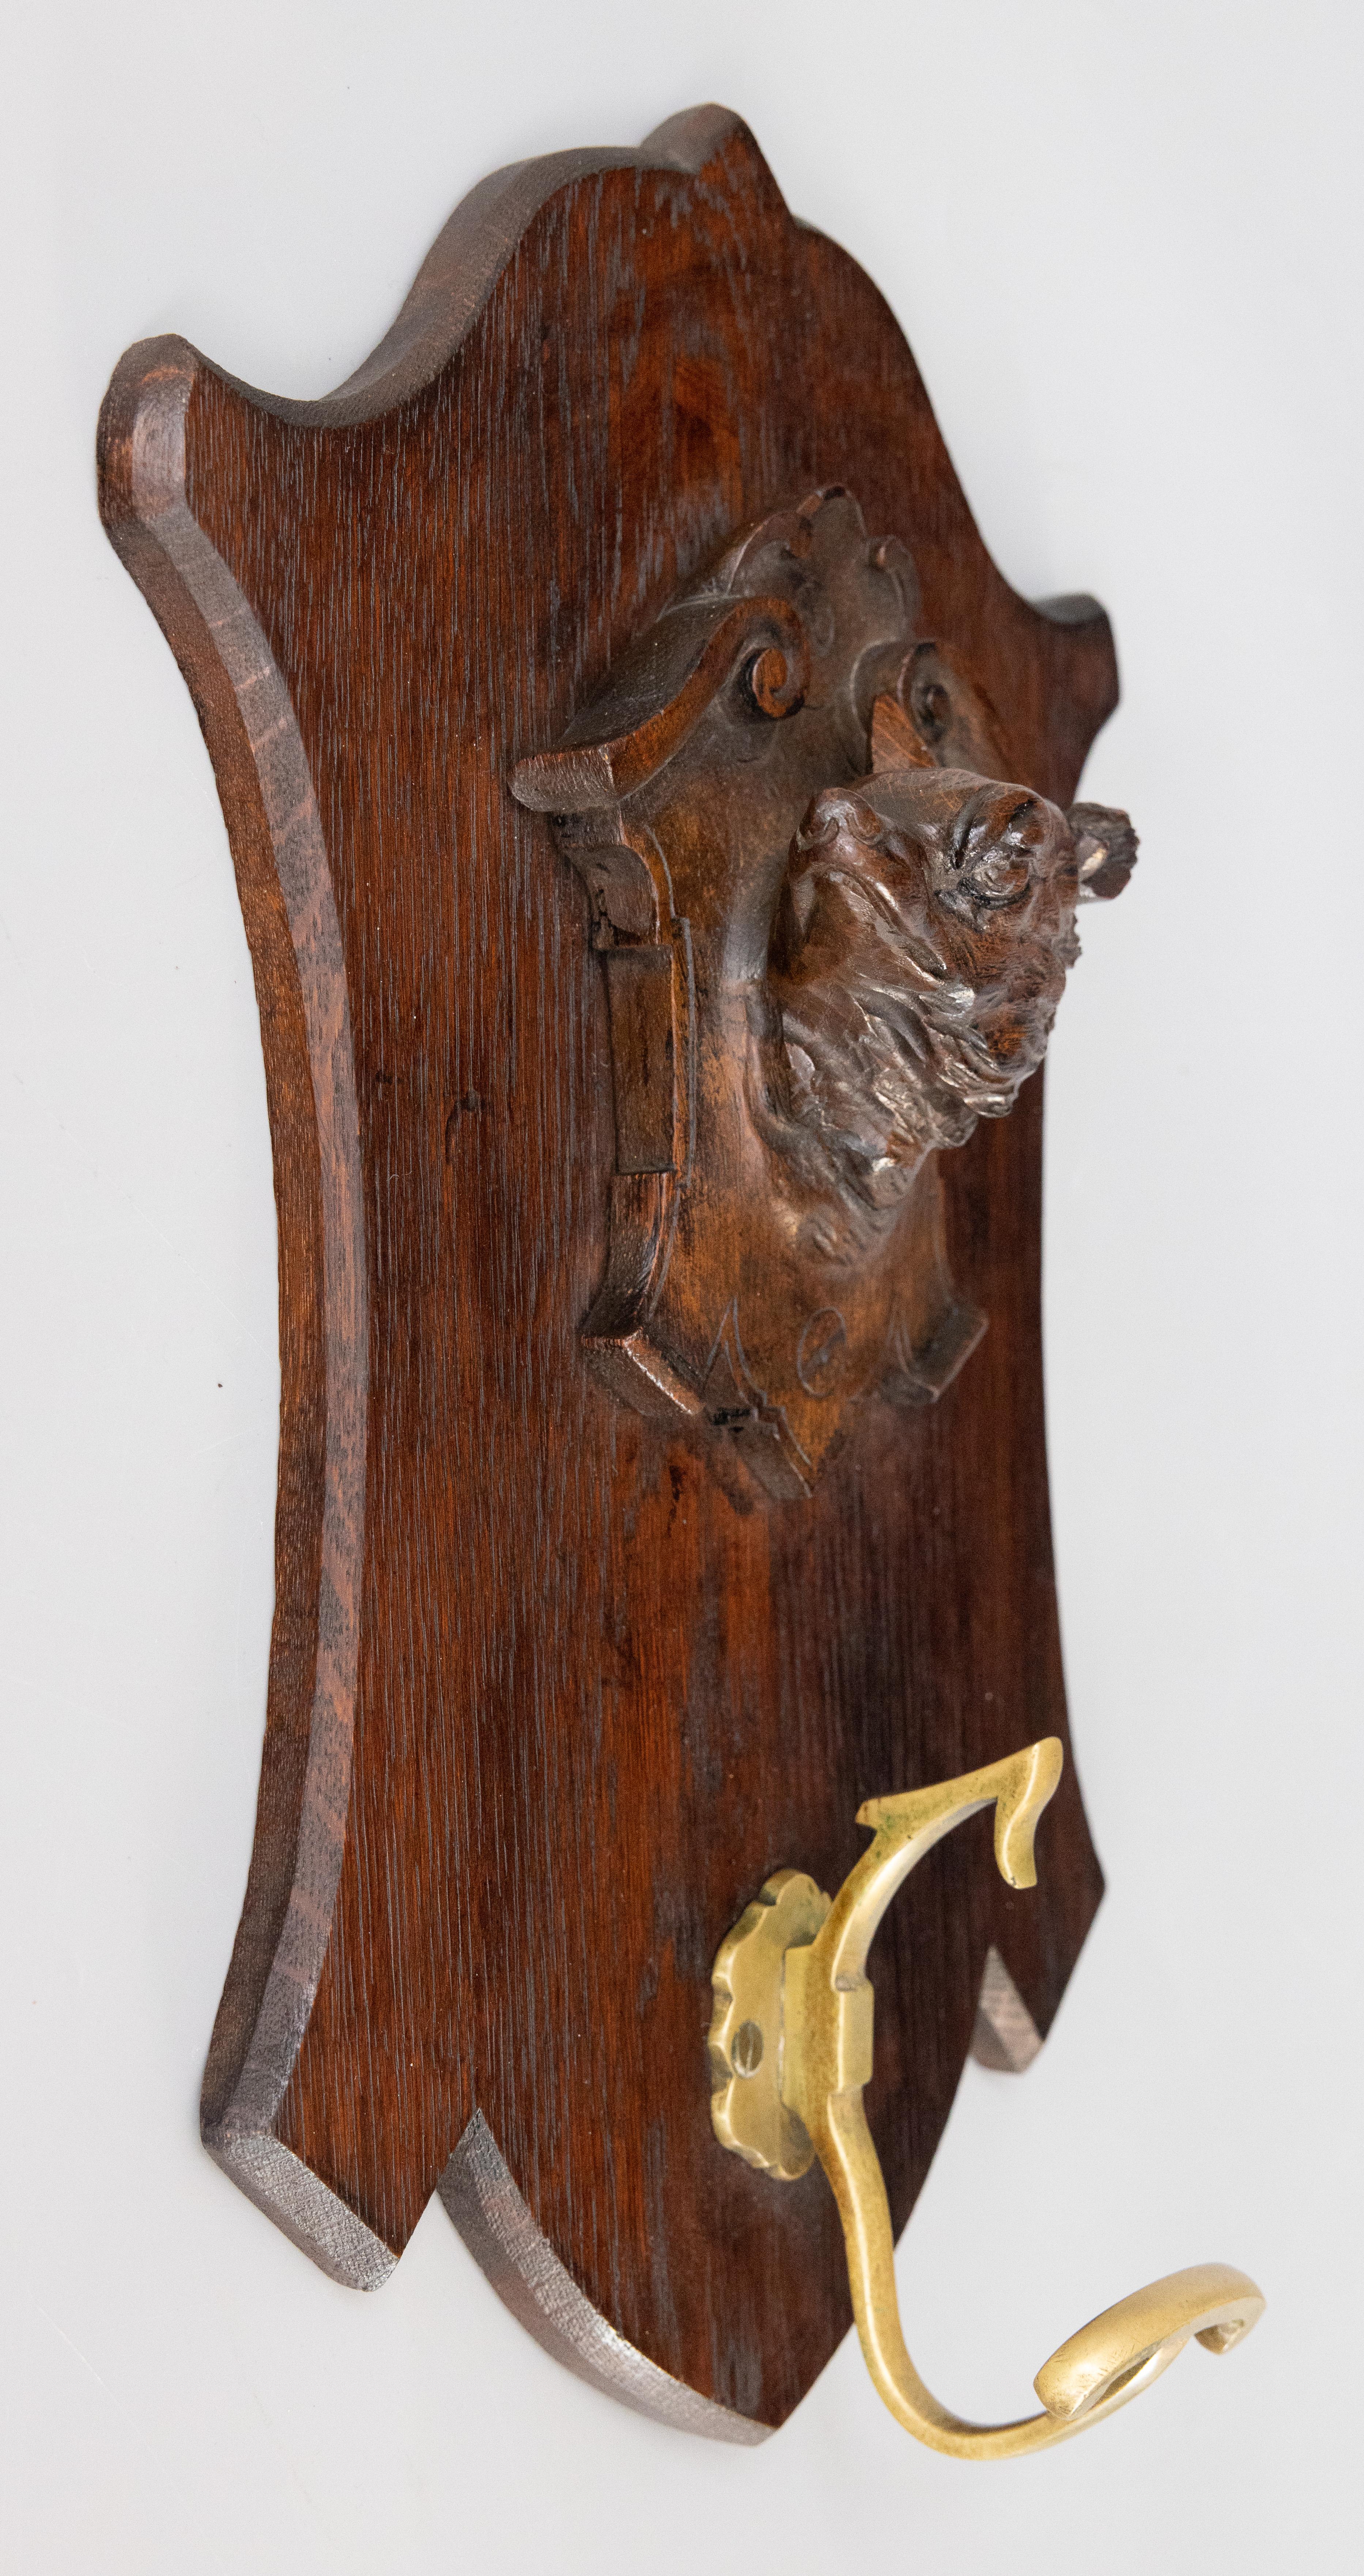 Antique Swiss Black Forest Carved Dog Head Bronze Hook Hanger Coat Rack, c. 1900 In Good Condition For Sale In Pearland, TX